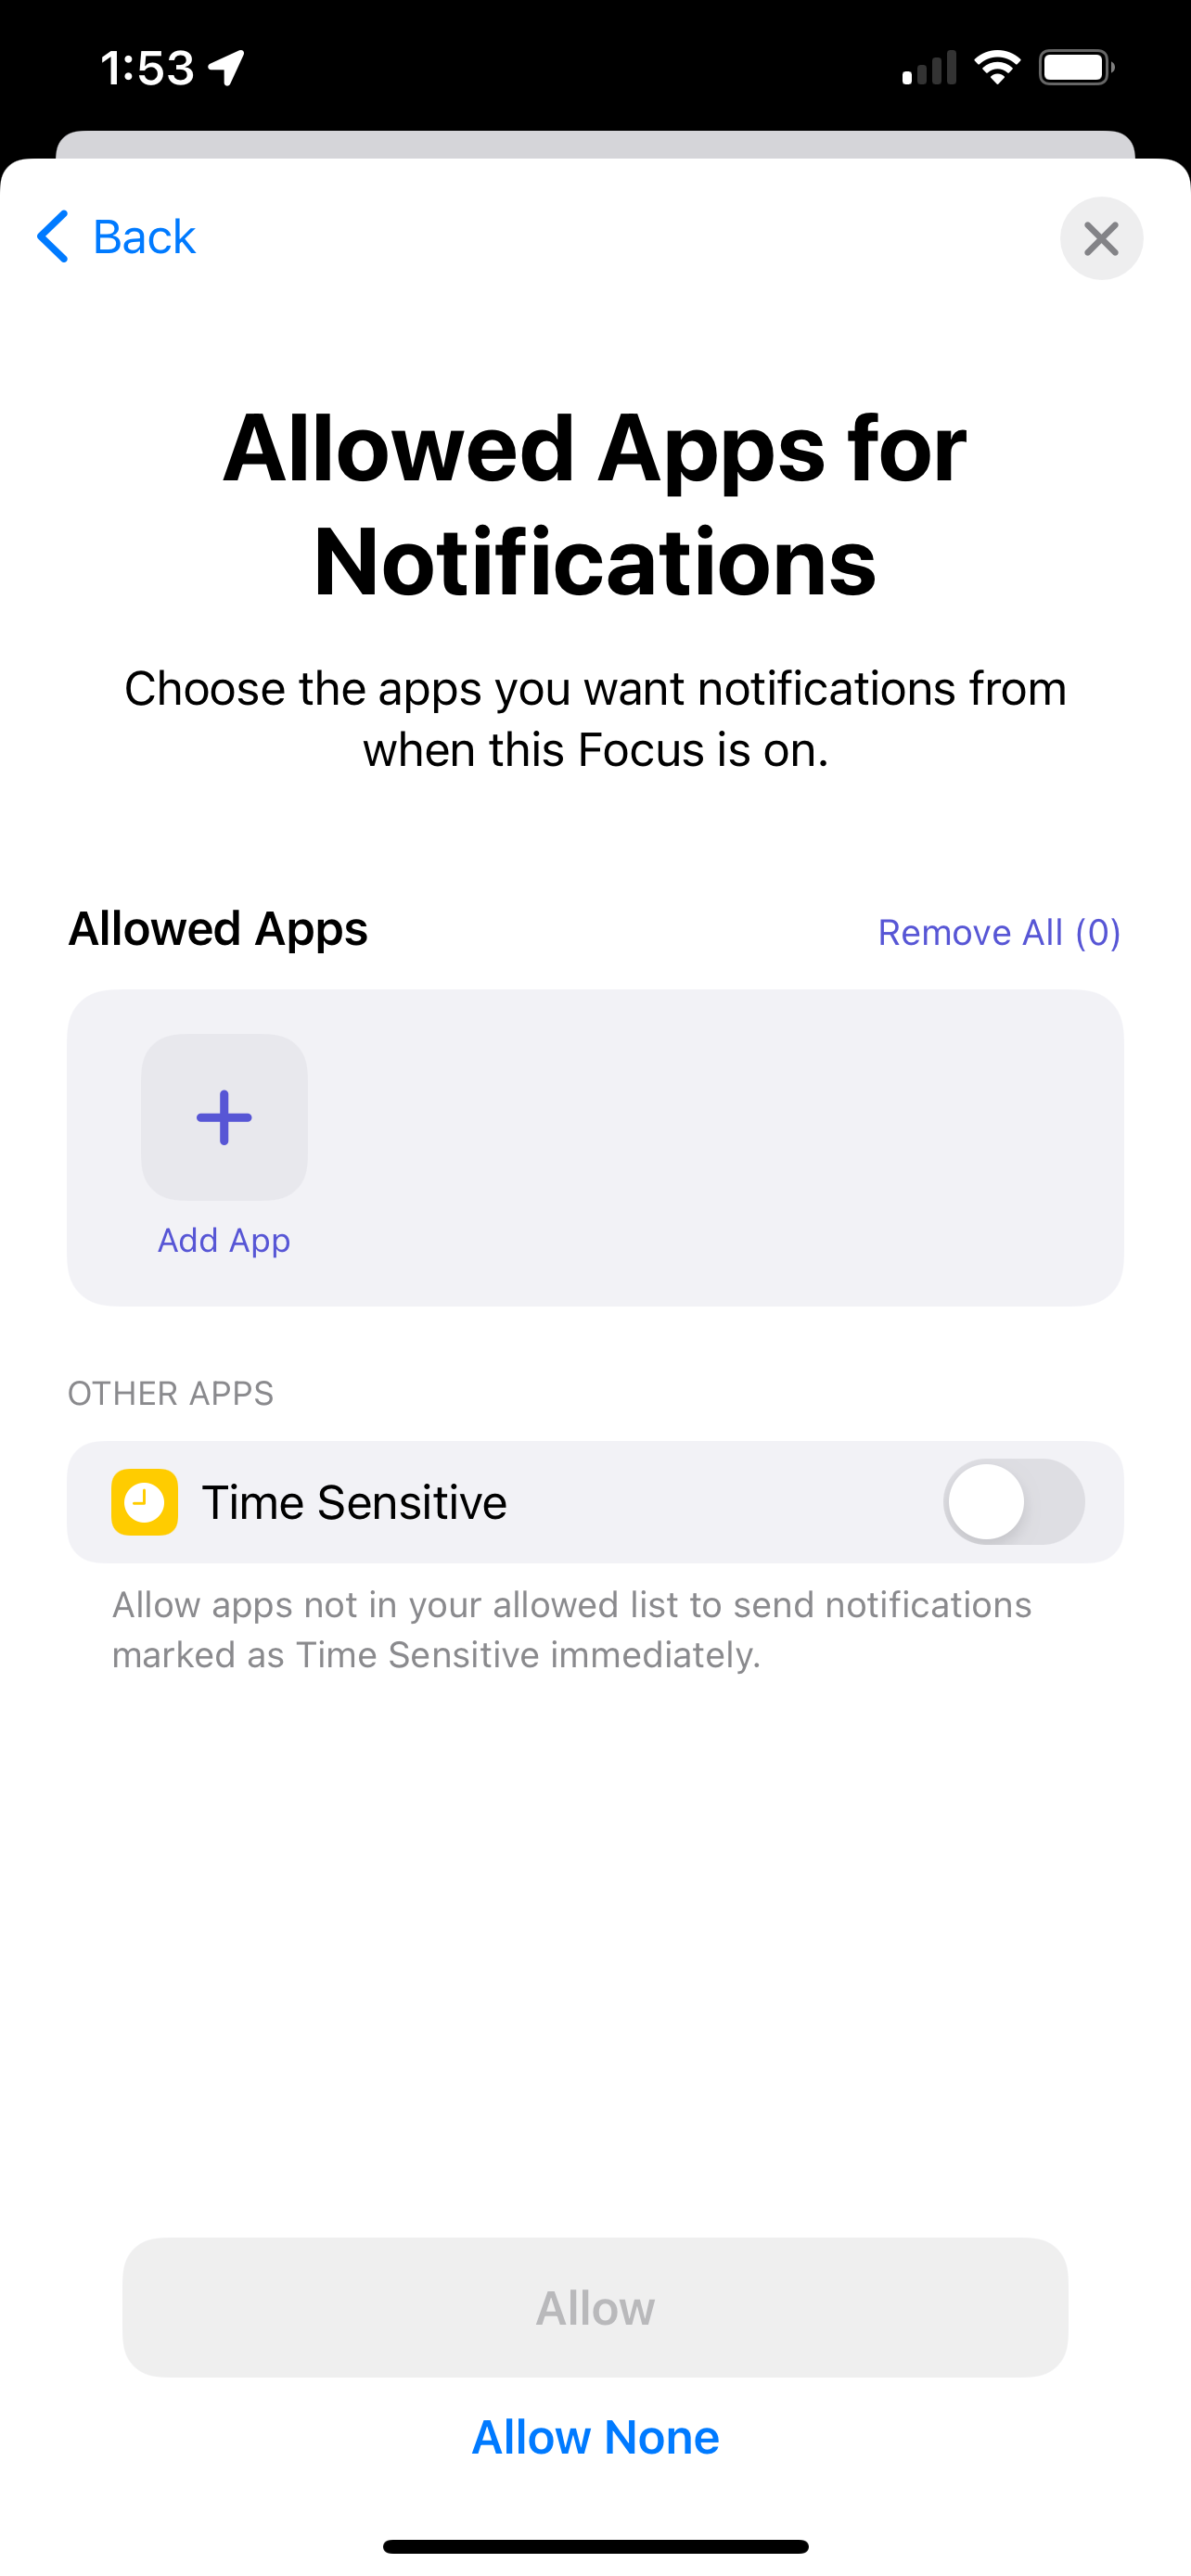 Allowed apps screen on Focus for iOS